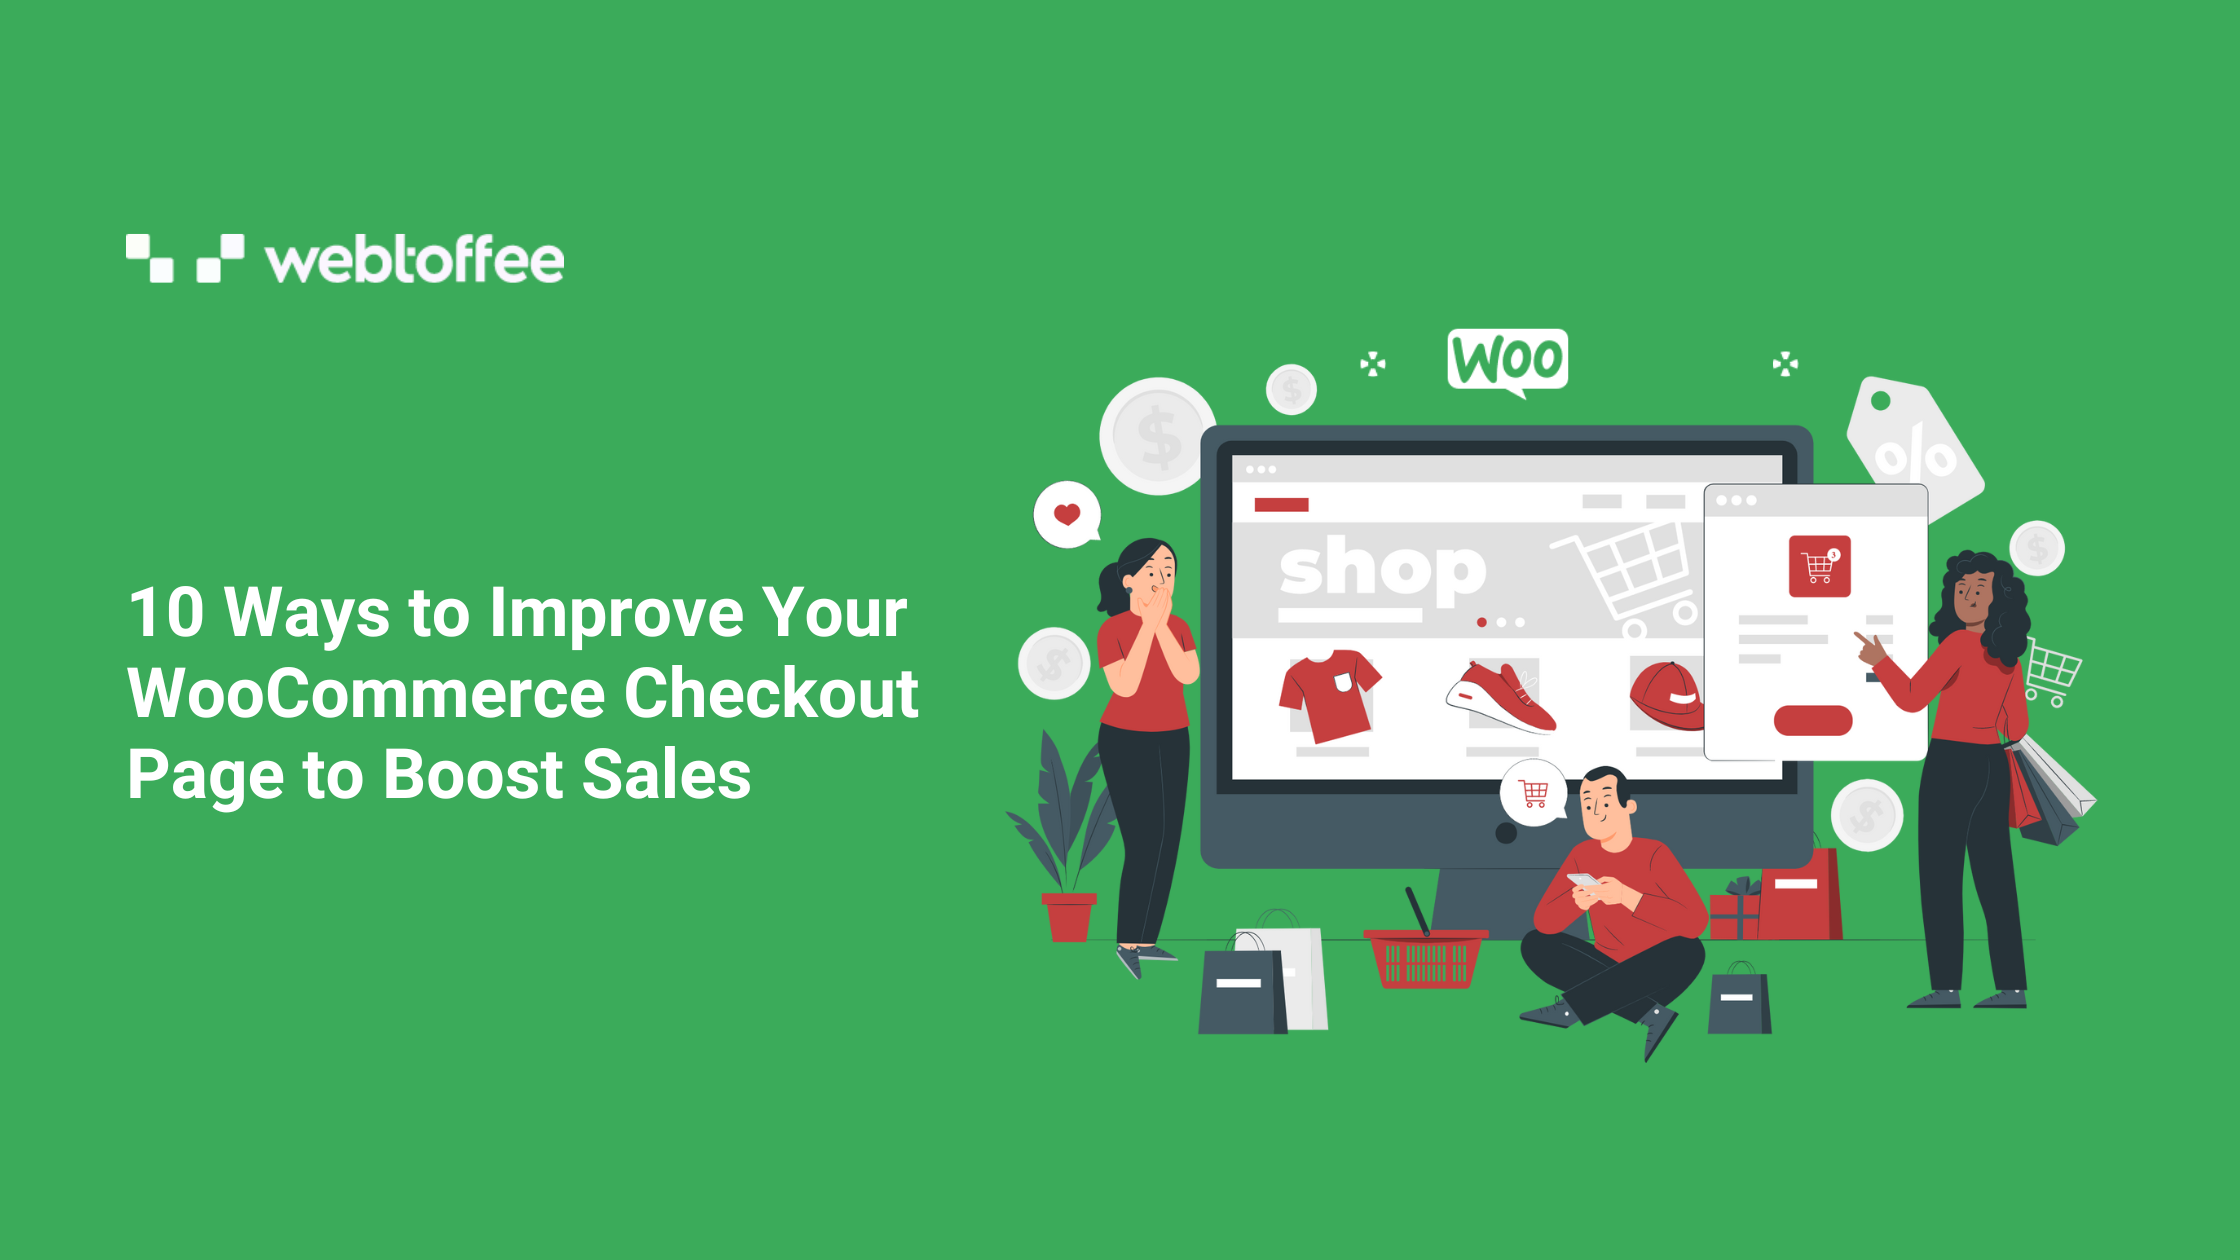 10 ways to improve your WooCommerce checkout page to boost sales - WebToffee